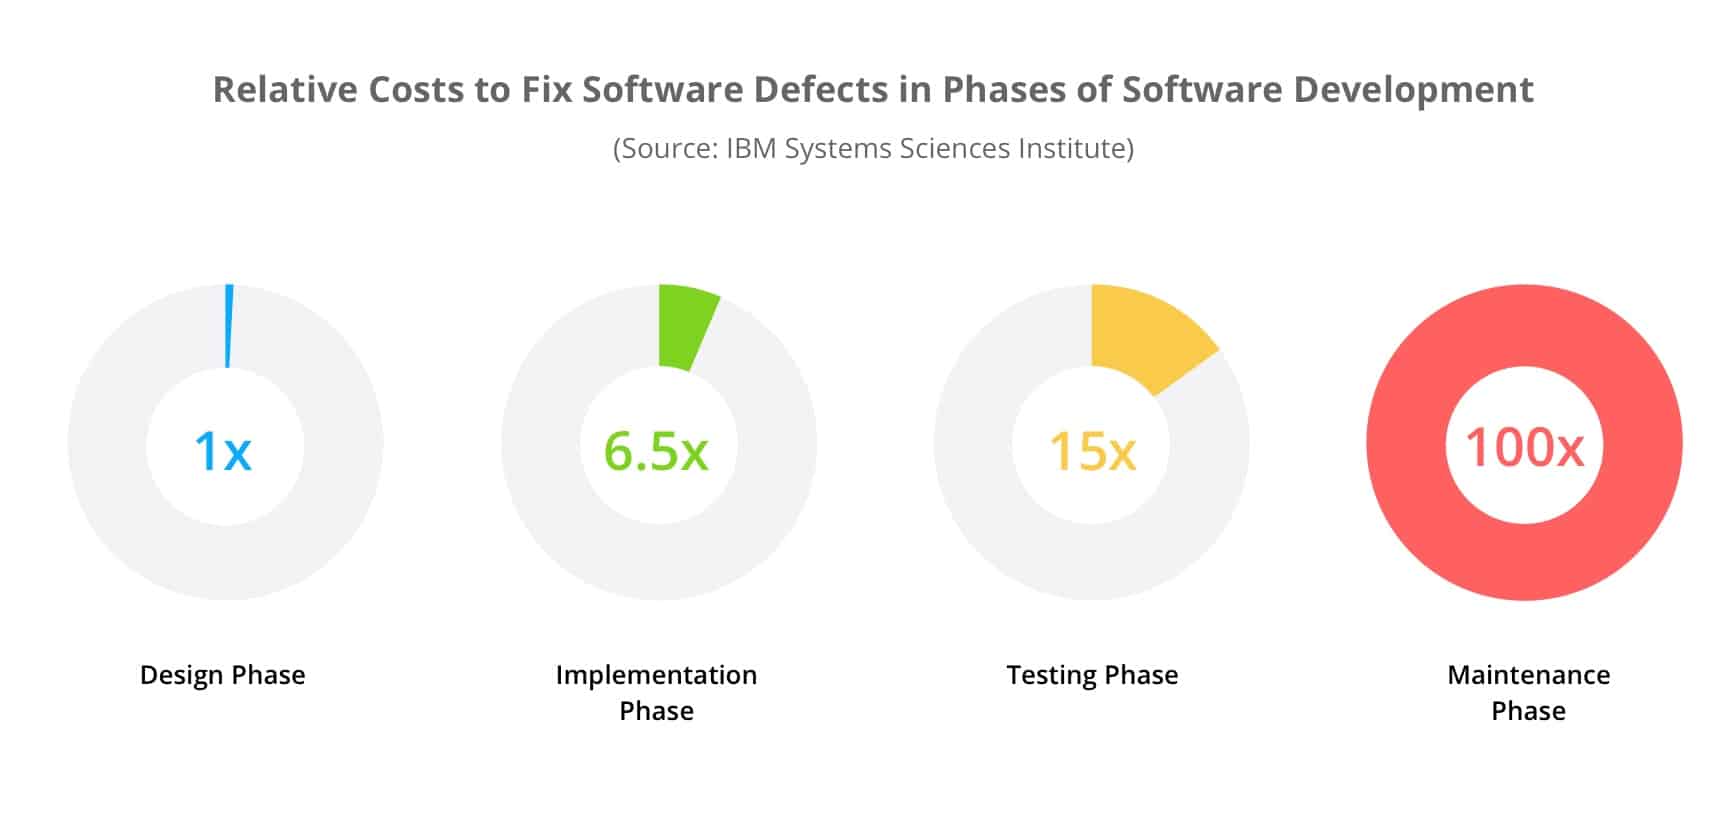 Relative Costs to Fix Software Defects in Phases of Software Development